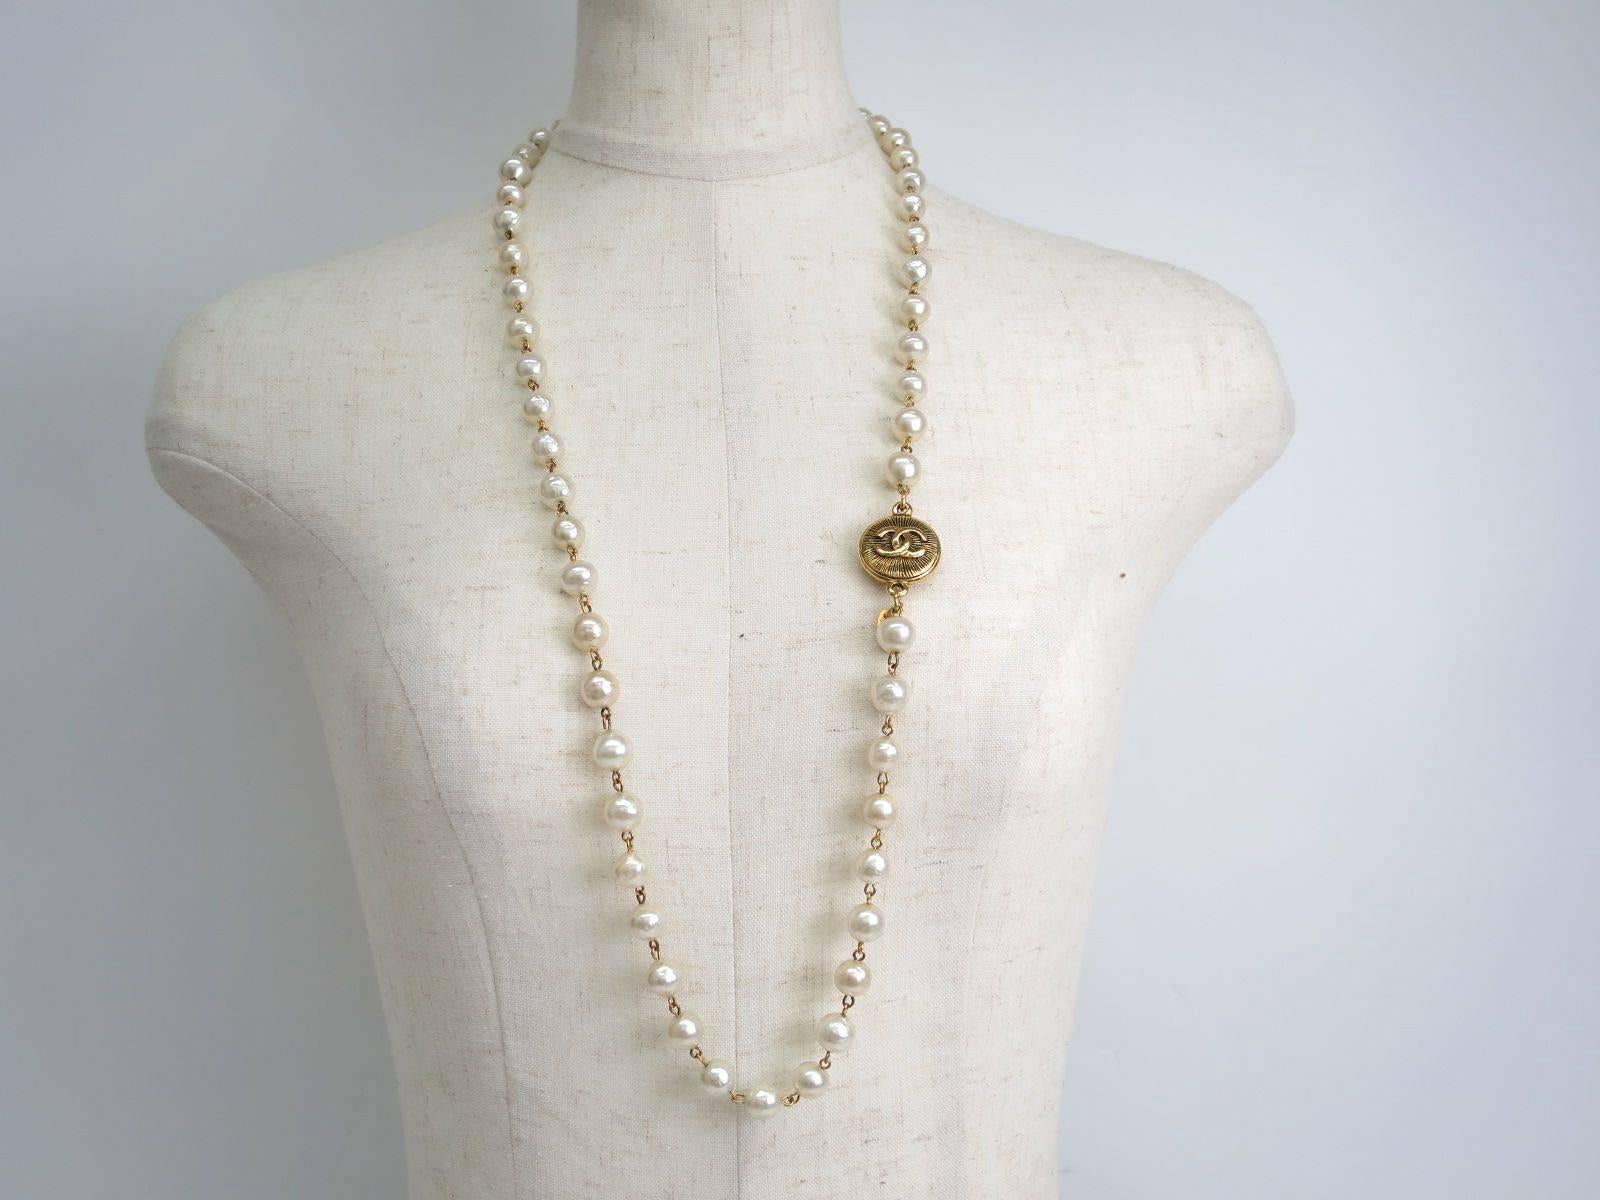 CURATOR'S NOTES

Chanel Vintage Single Strand Pearl Gold CC Charm Sautoir Long Necklace  

Own a classic piece of vintage Chanel with this timeless, single strand, faux pearl sautoir necklace featuring gold CC charm.  Includes original Chanel box.